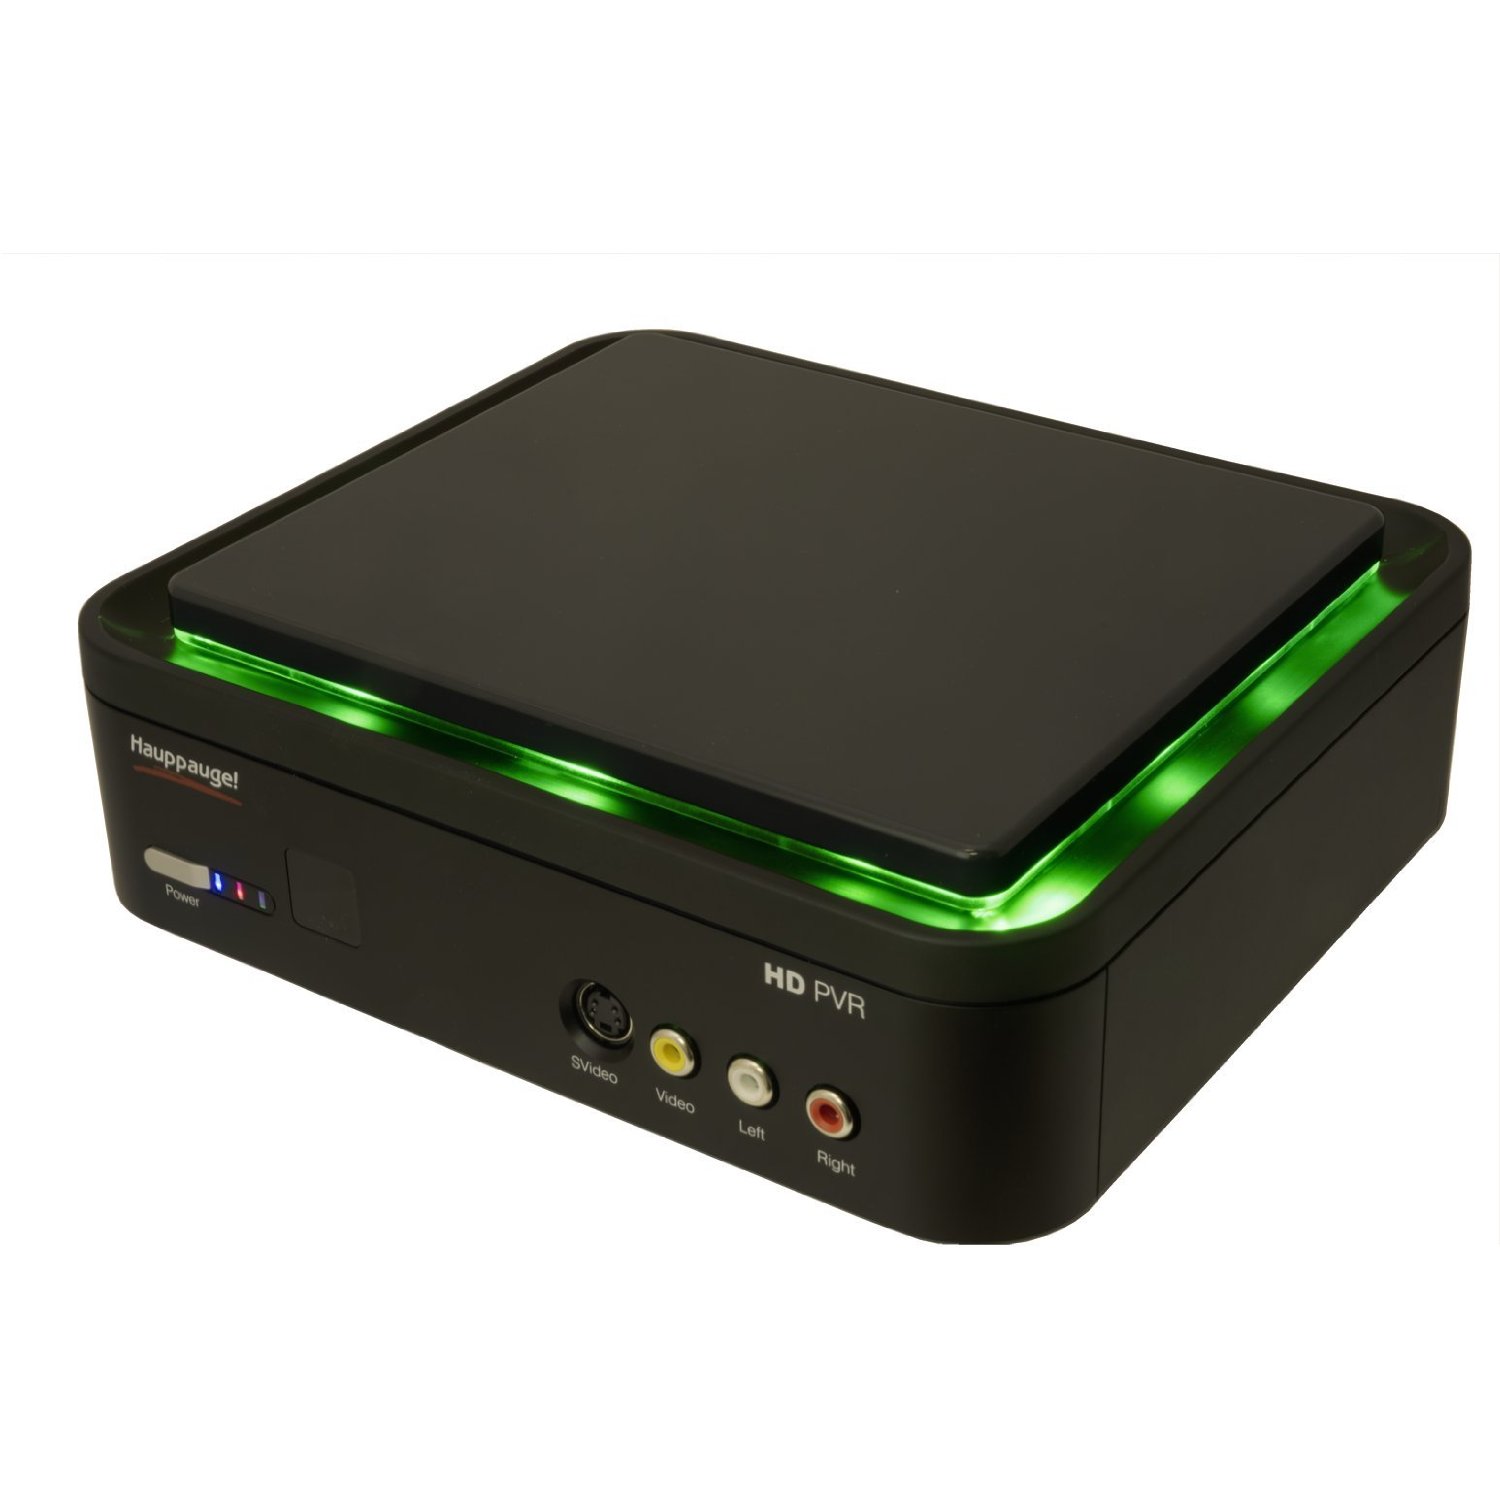 http://thetechjournal.com/wp-content/uploads/images/1112/1325143847-hauppauge-1445-hdpvr-gaming-edition-high-definition-personal-video-recorder-1.jpg